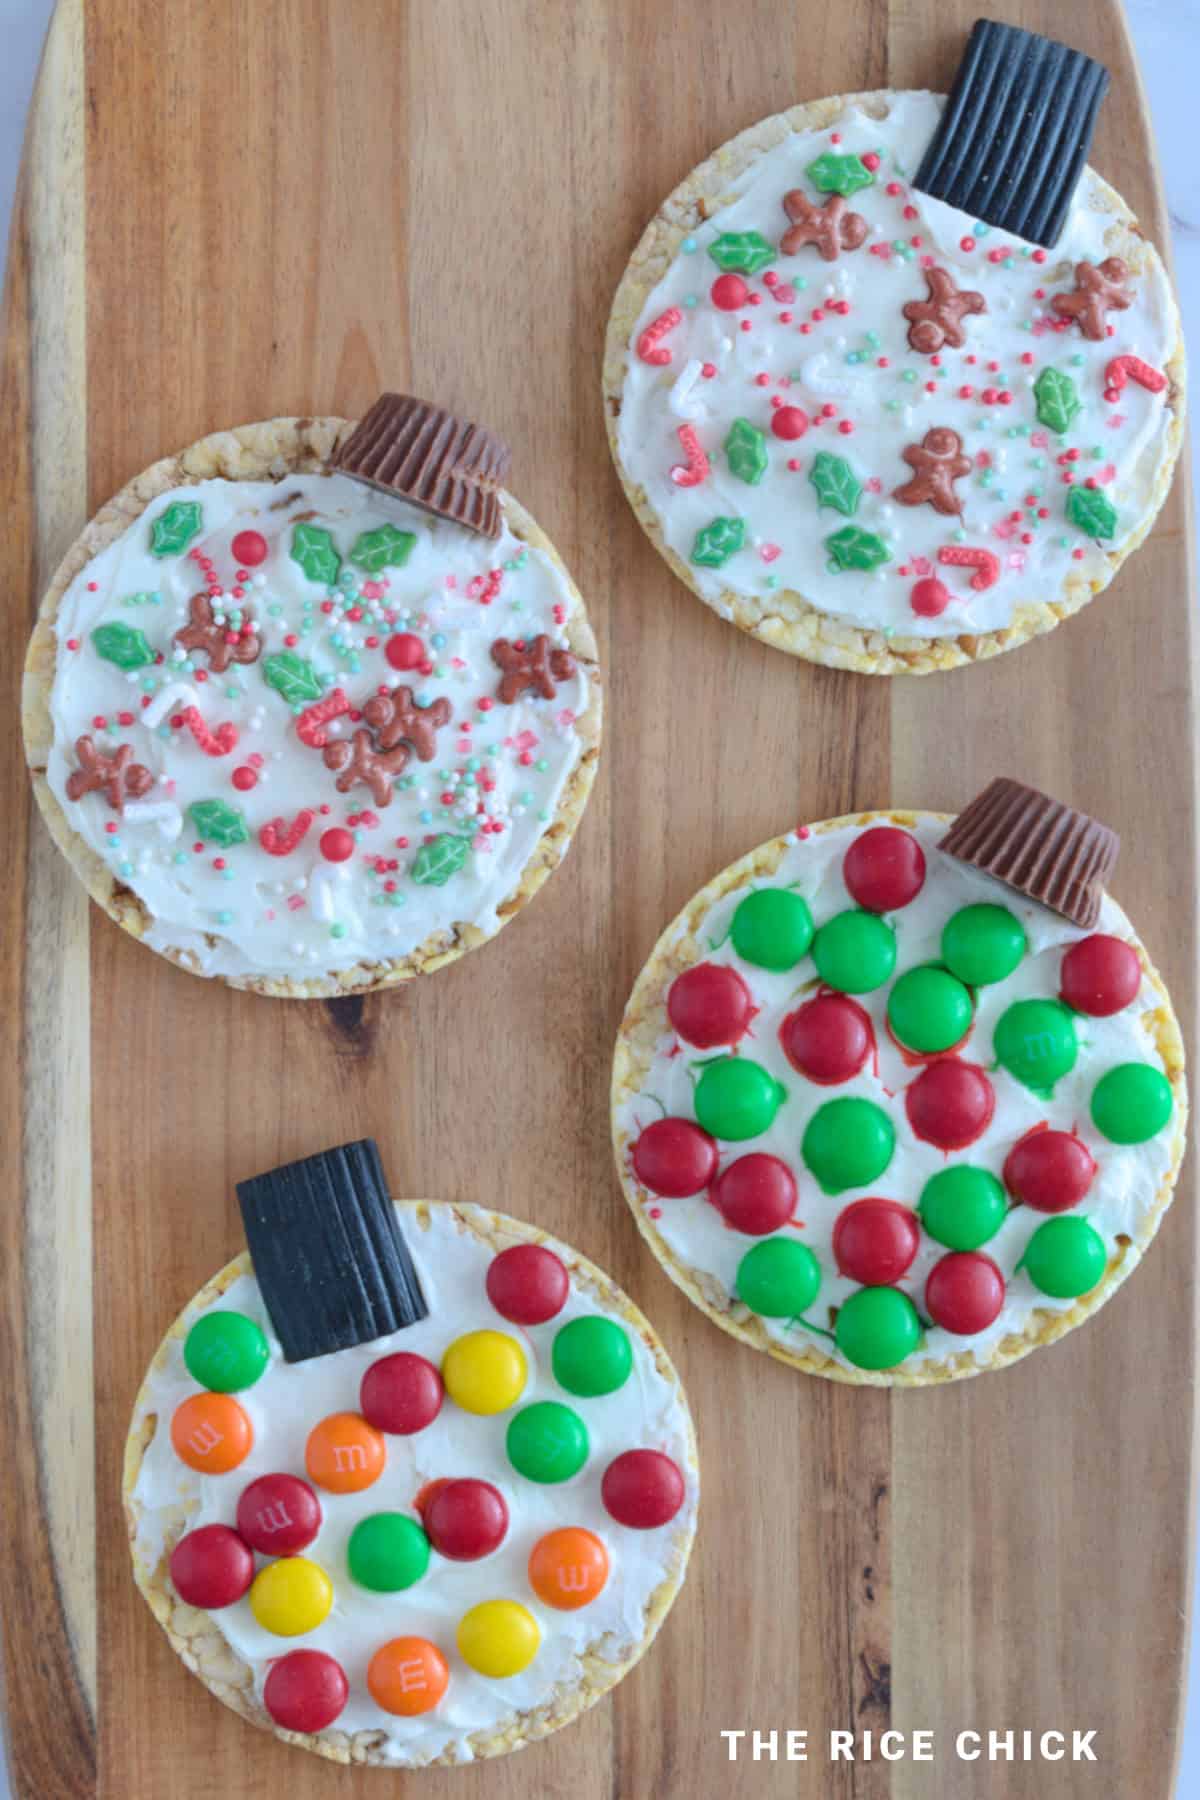 Christmas ornaments made from rice cakes, M&M's, and Christmas sprinkles on a wooden board.